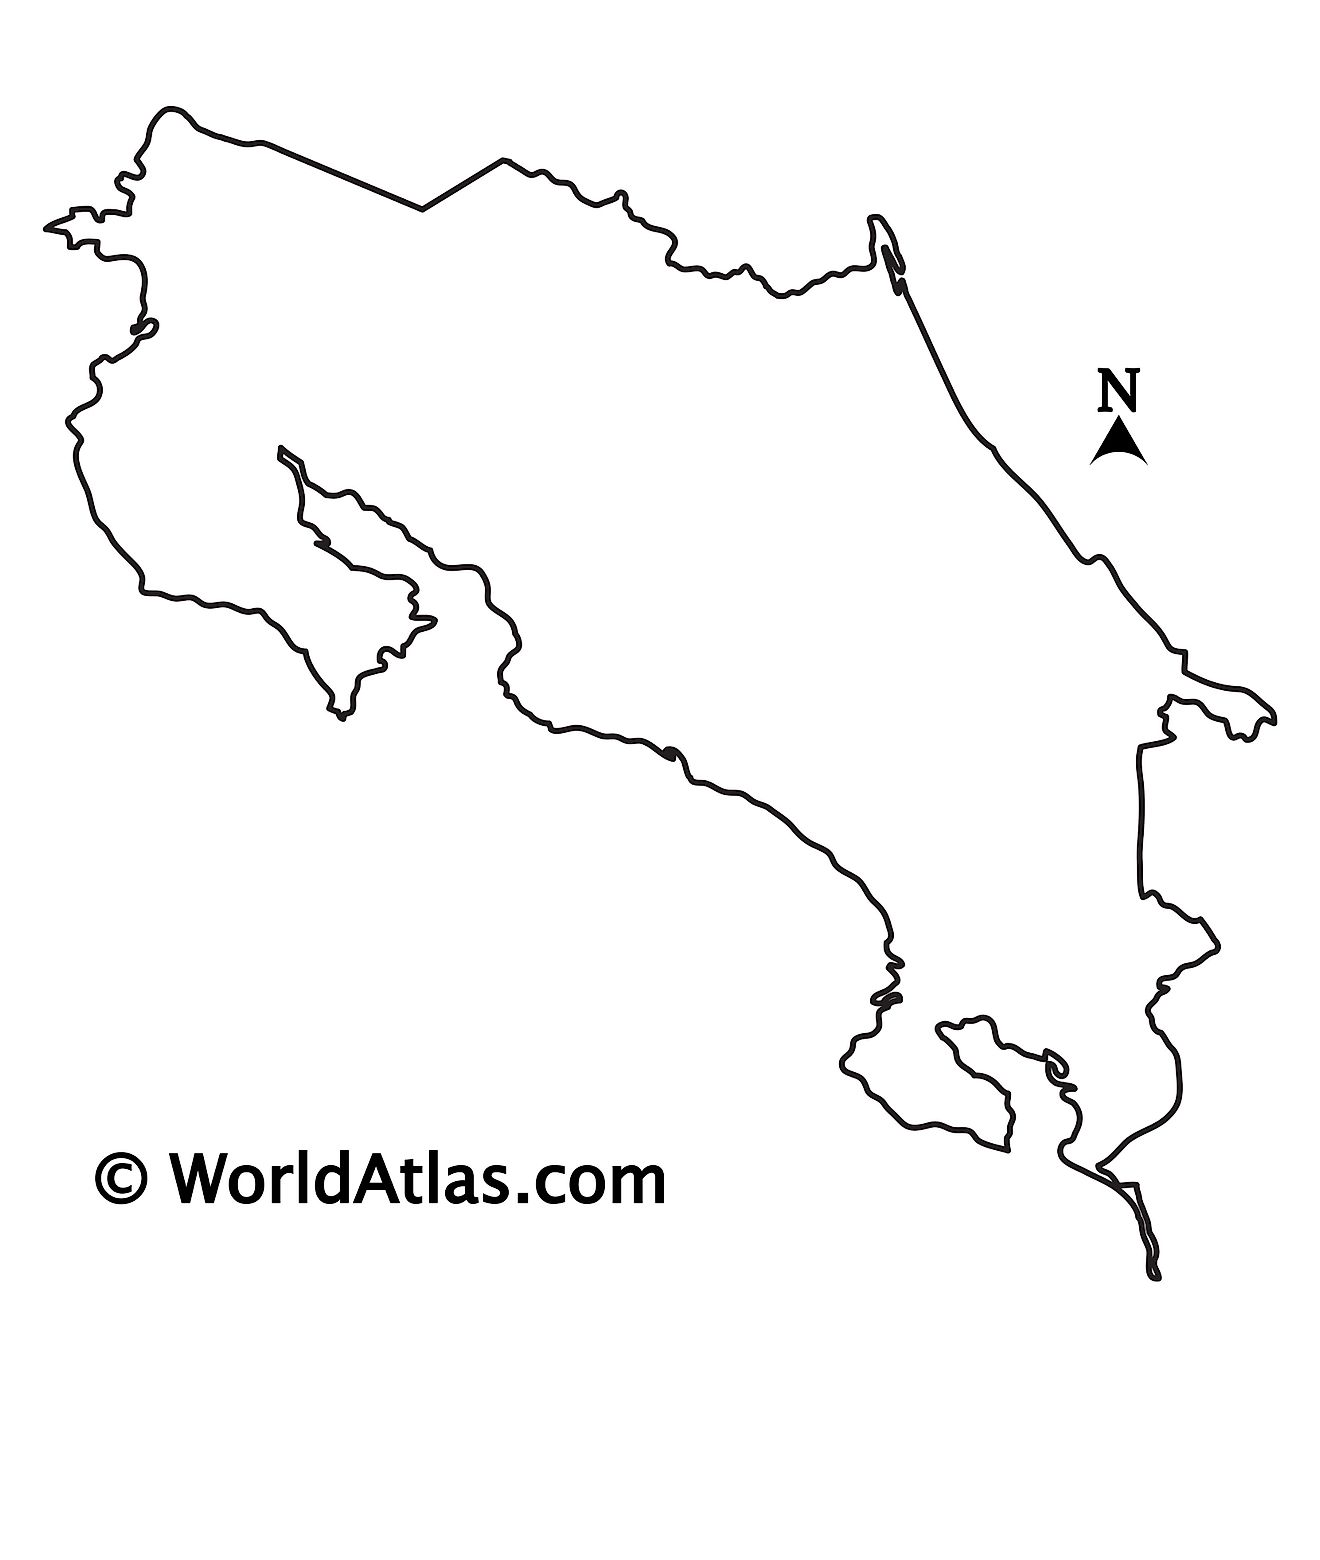 Blank Outline Map of Costa Rica